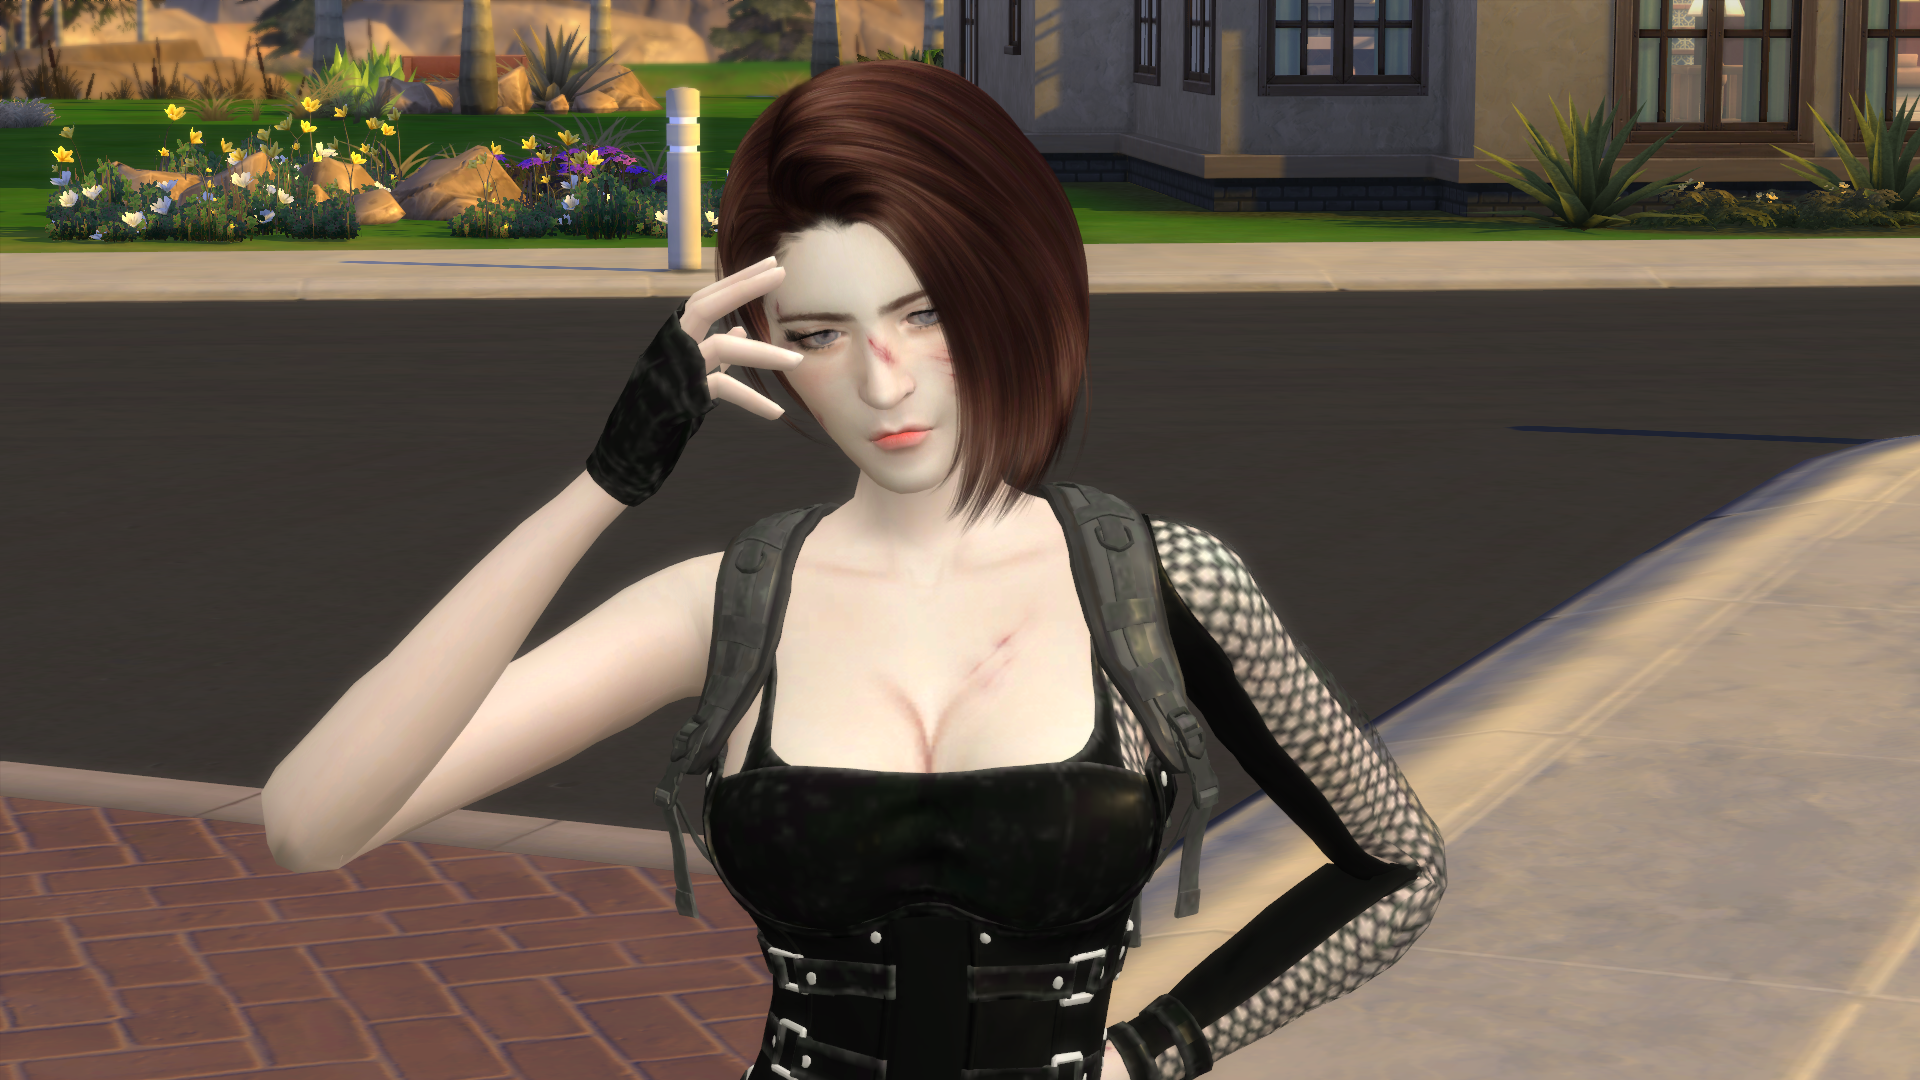 1485100262_TheSims42_15_202110_10_04PM.png.036352e1047a116dfcc133ec2ff5eb77.png